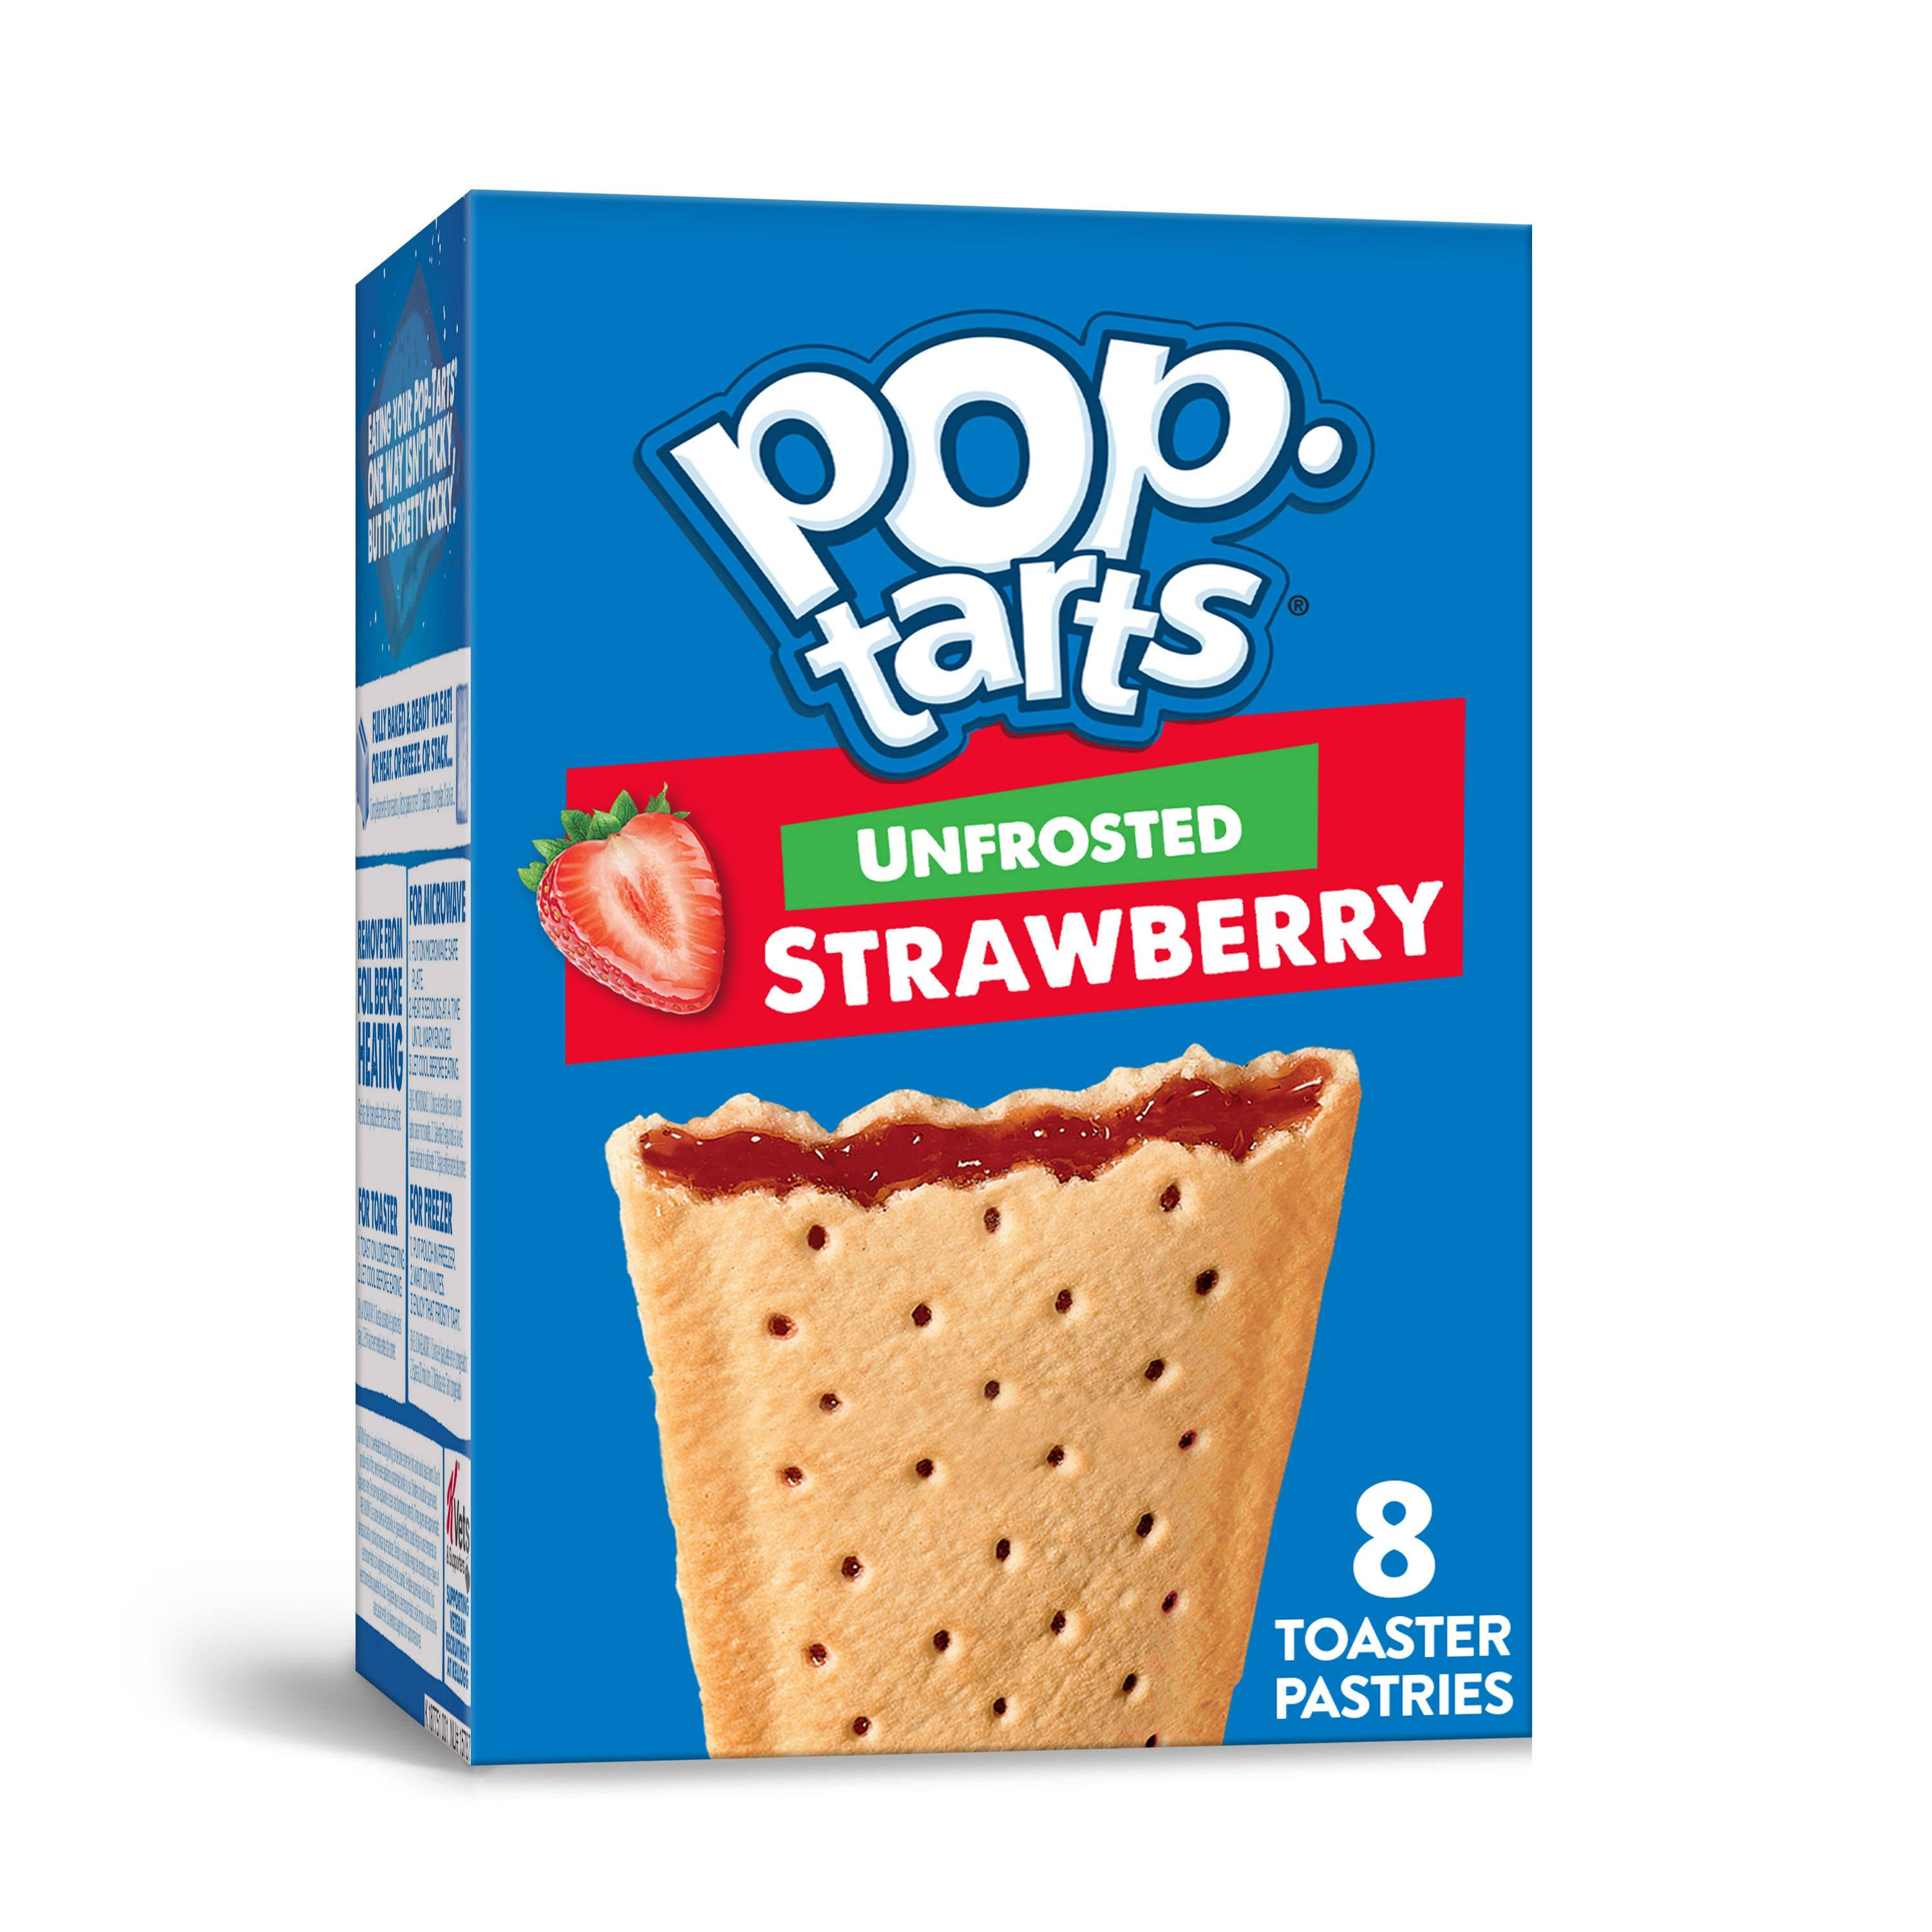 Pop-Tarts Toaster Pastries, Strawberry, Unfrosted, 8 Pack - 8 toaster pastries, 13.5 oz